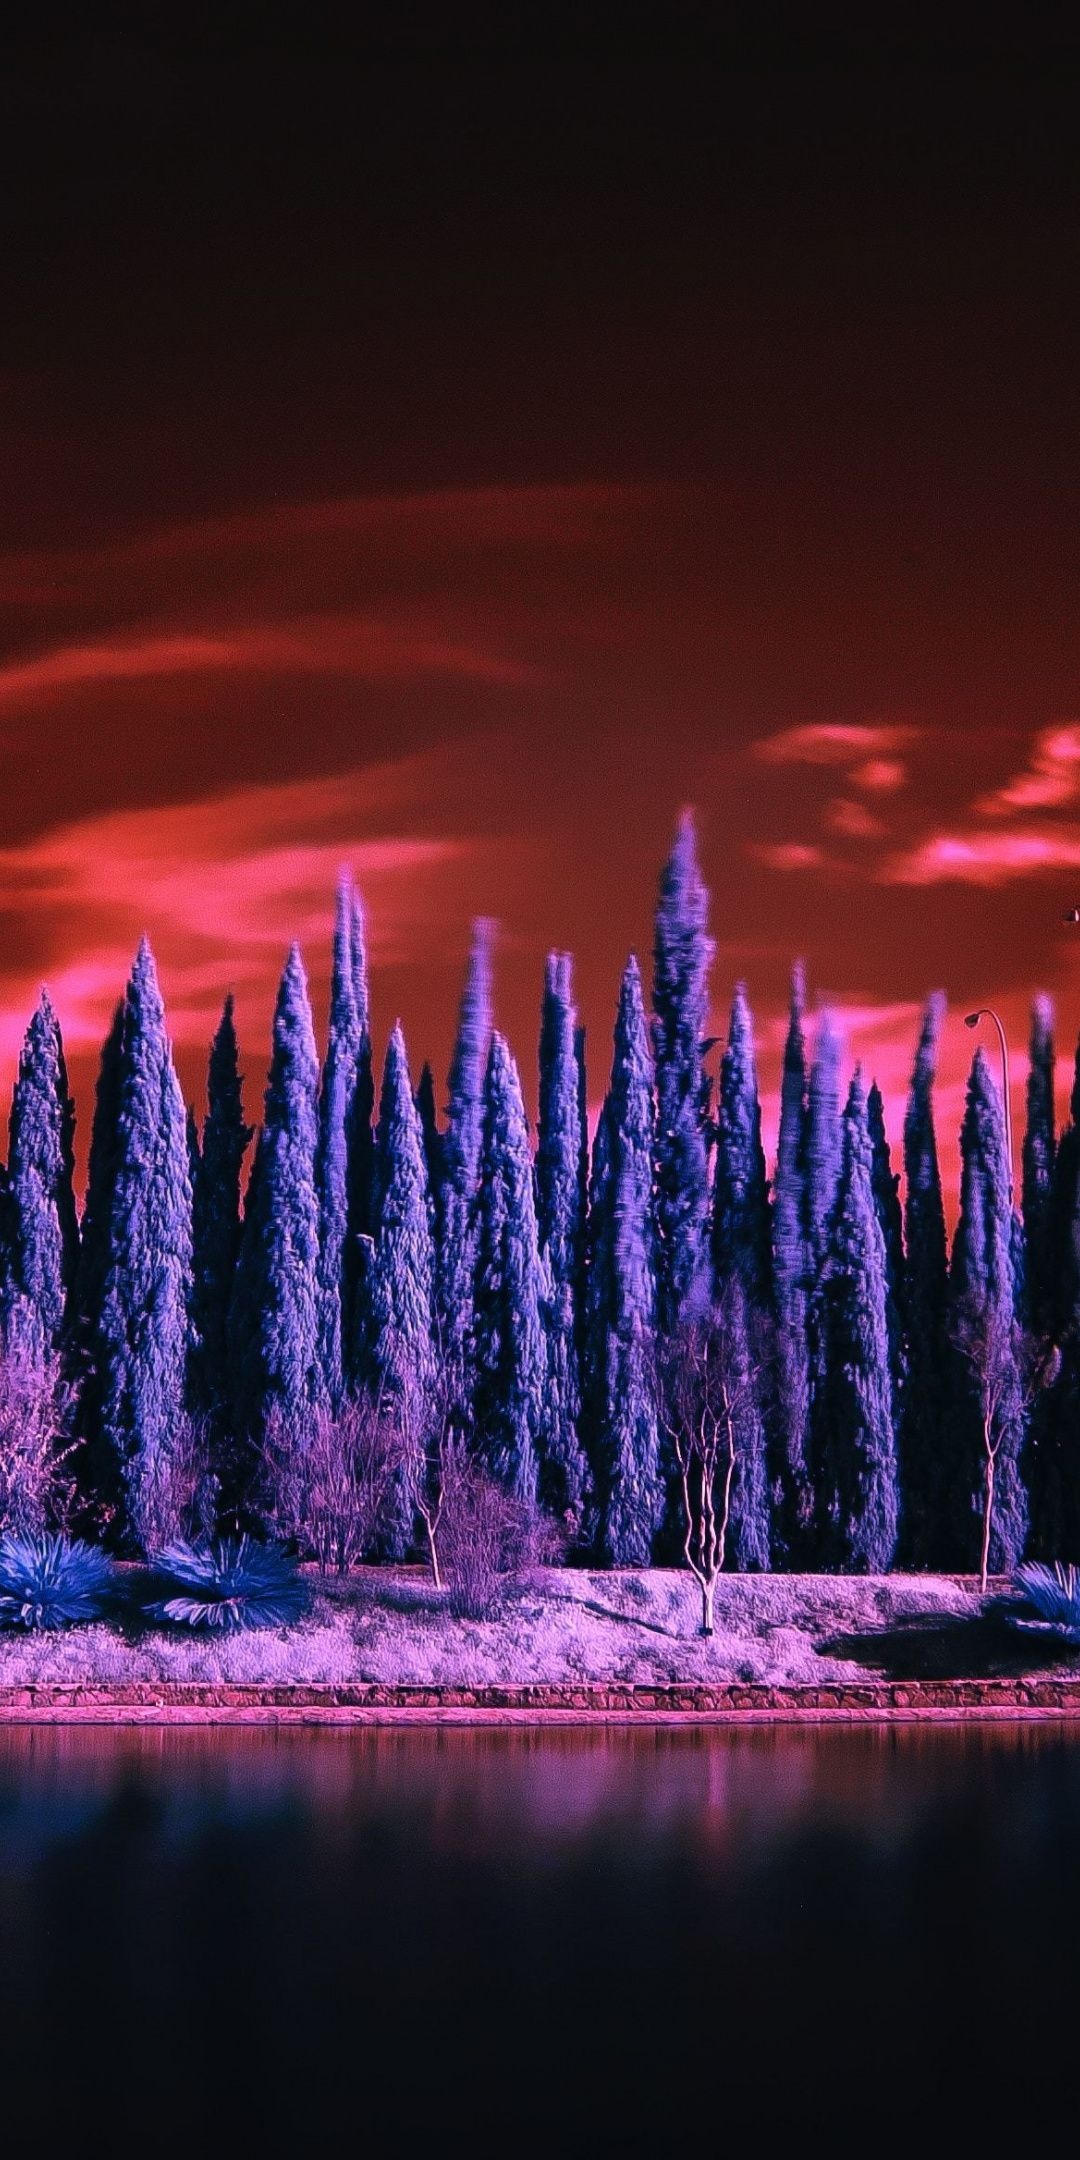 Cypress trees, Lake infrared, HD nature wallpapers, 1080x2160 HD Phone